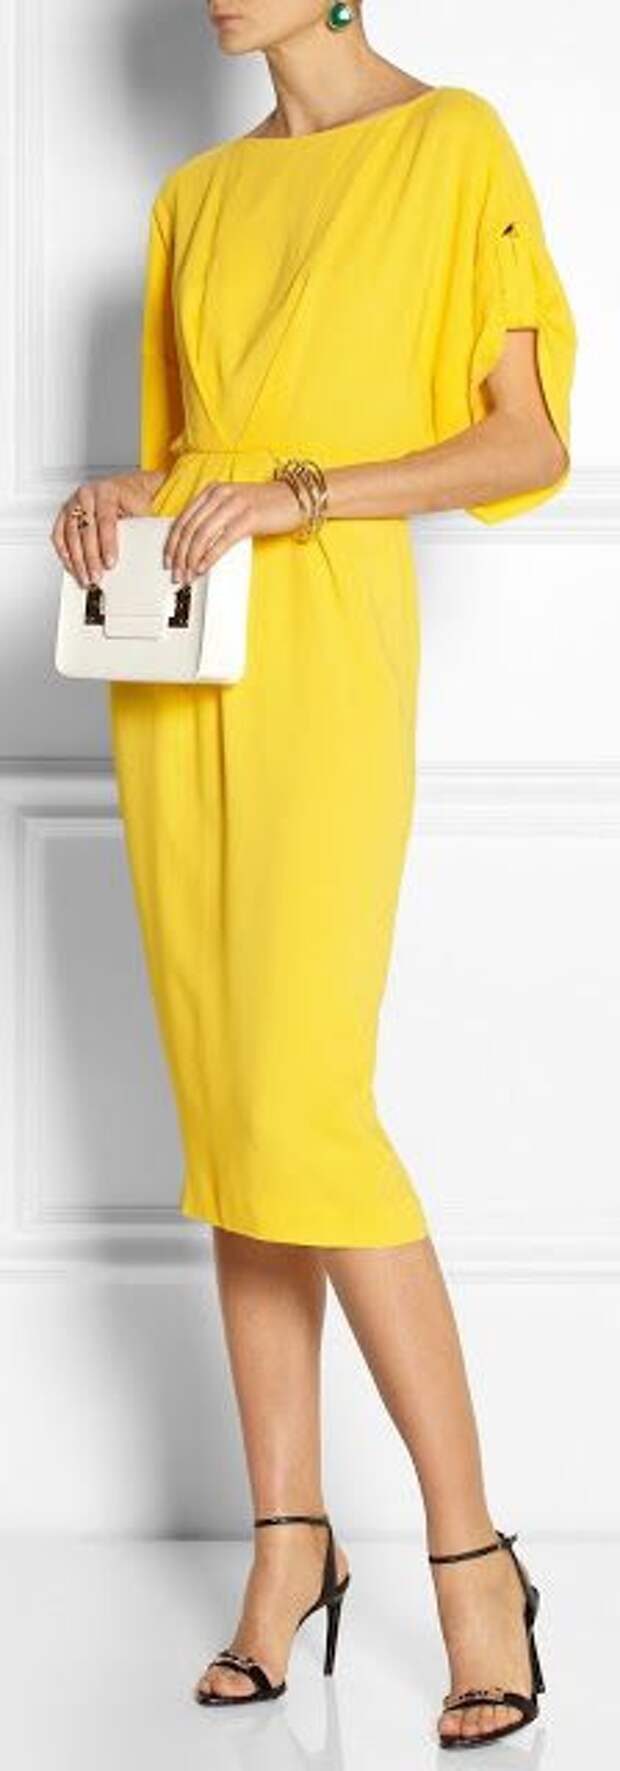 Chic look | Beautiful yellow dress with black heeled sandals